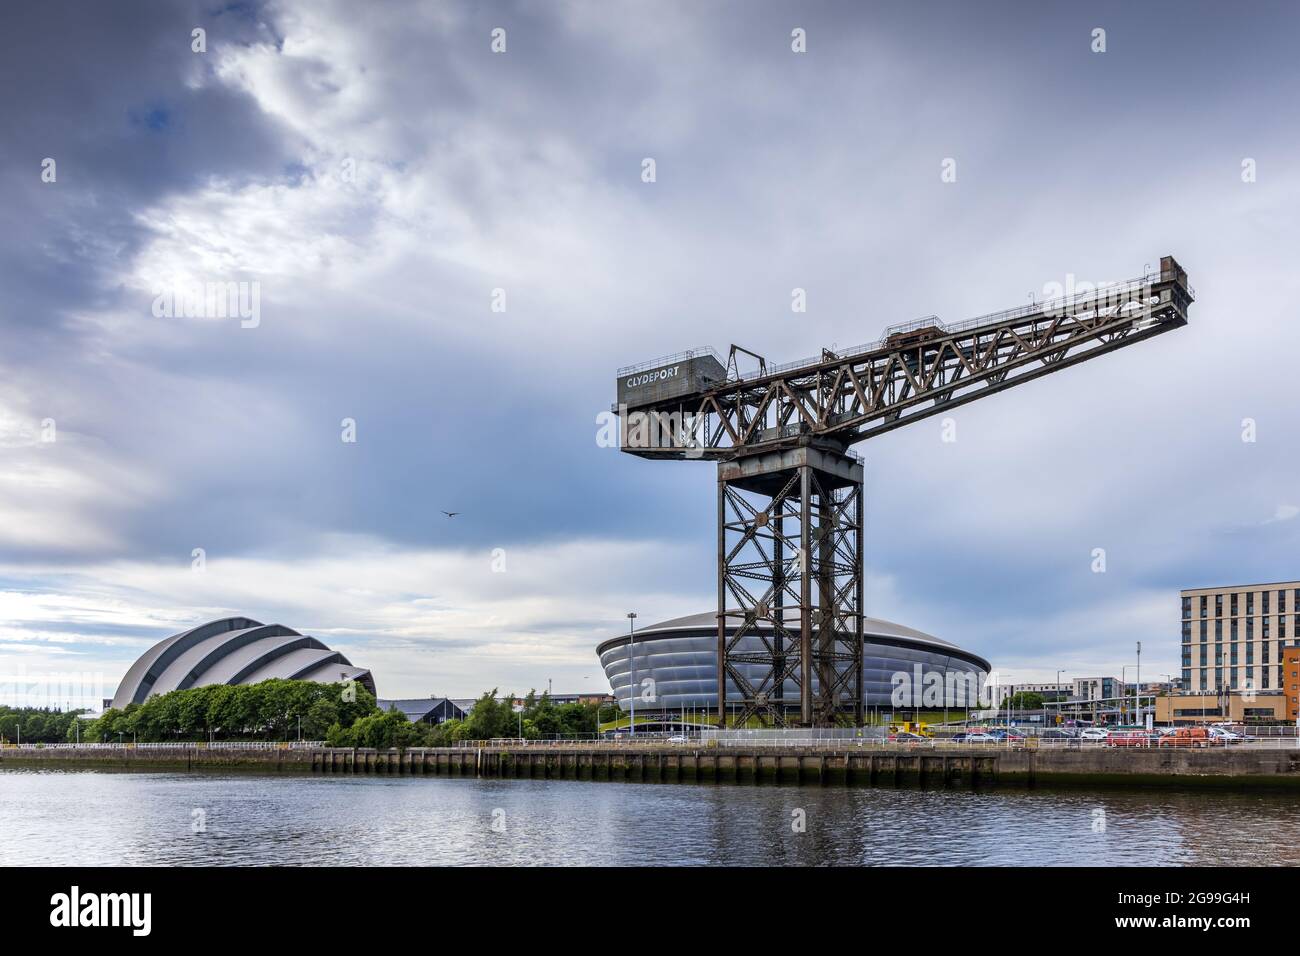 The Finnieston Crane by the River Clyde in Glasgow, Scotland. In the background is the SEC Armadillo building and the SSE Hydro building. Stock Photo